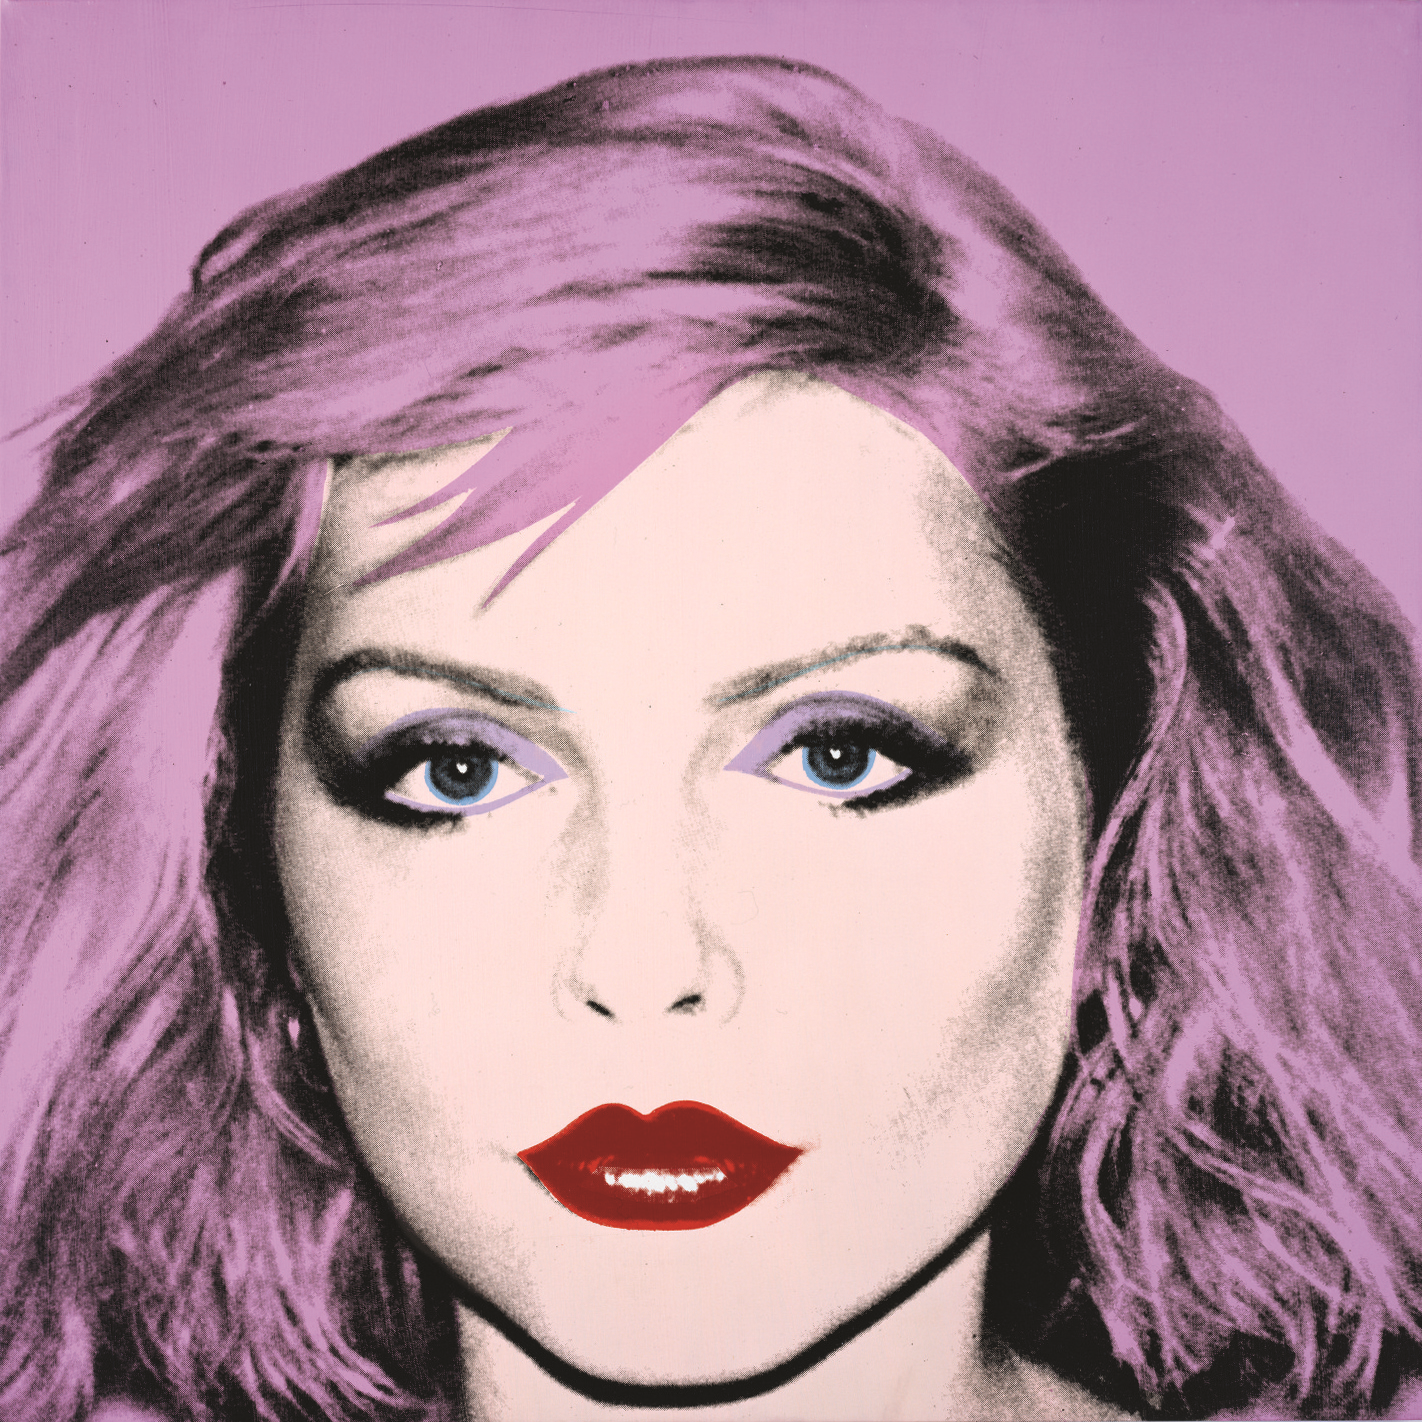 Debbie Harry (1980) by Andy Warhol. Private Collection / © The Andy Warhol Foundation for the Visual Arts, Inc. From Andy Warhol Portraits